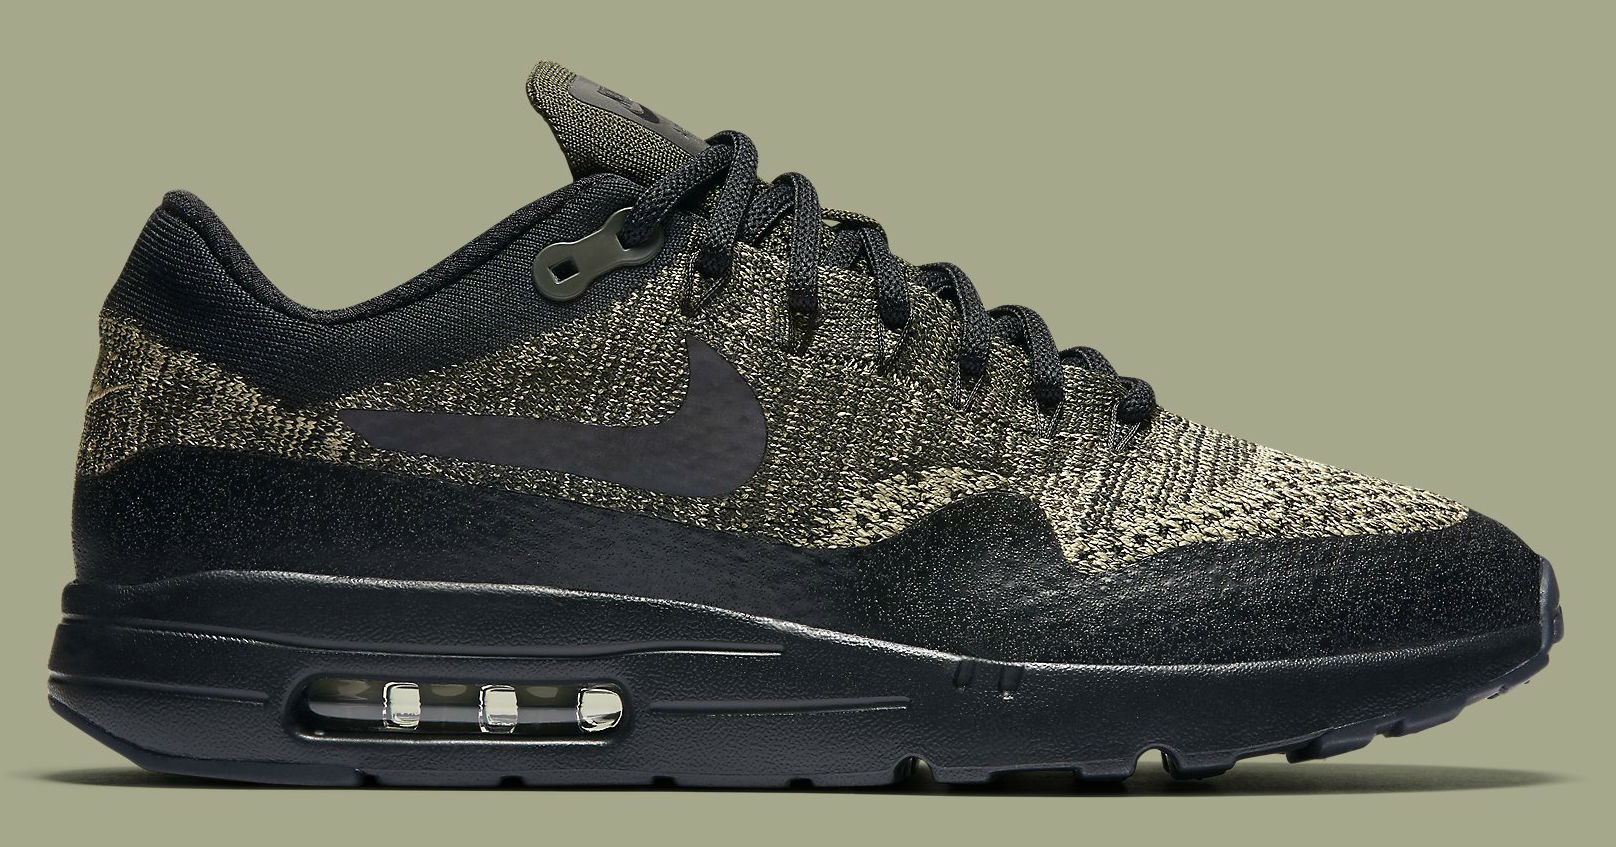 Archives des nike flyknit air max - Le 